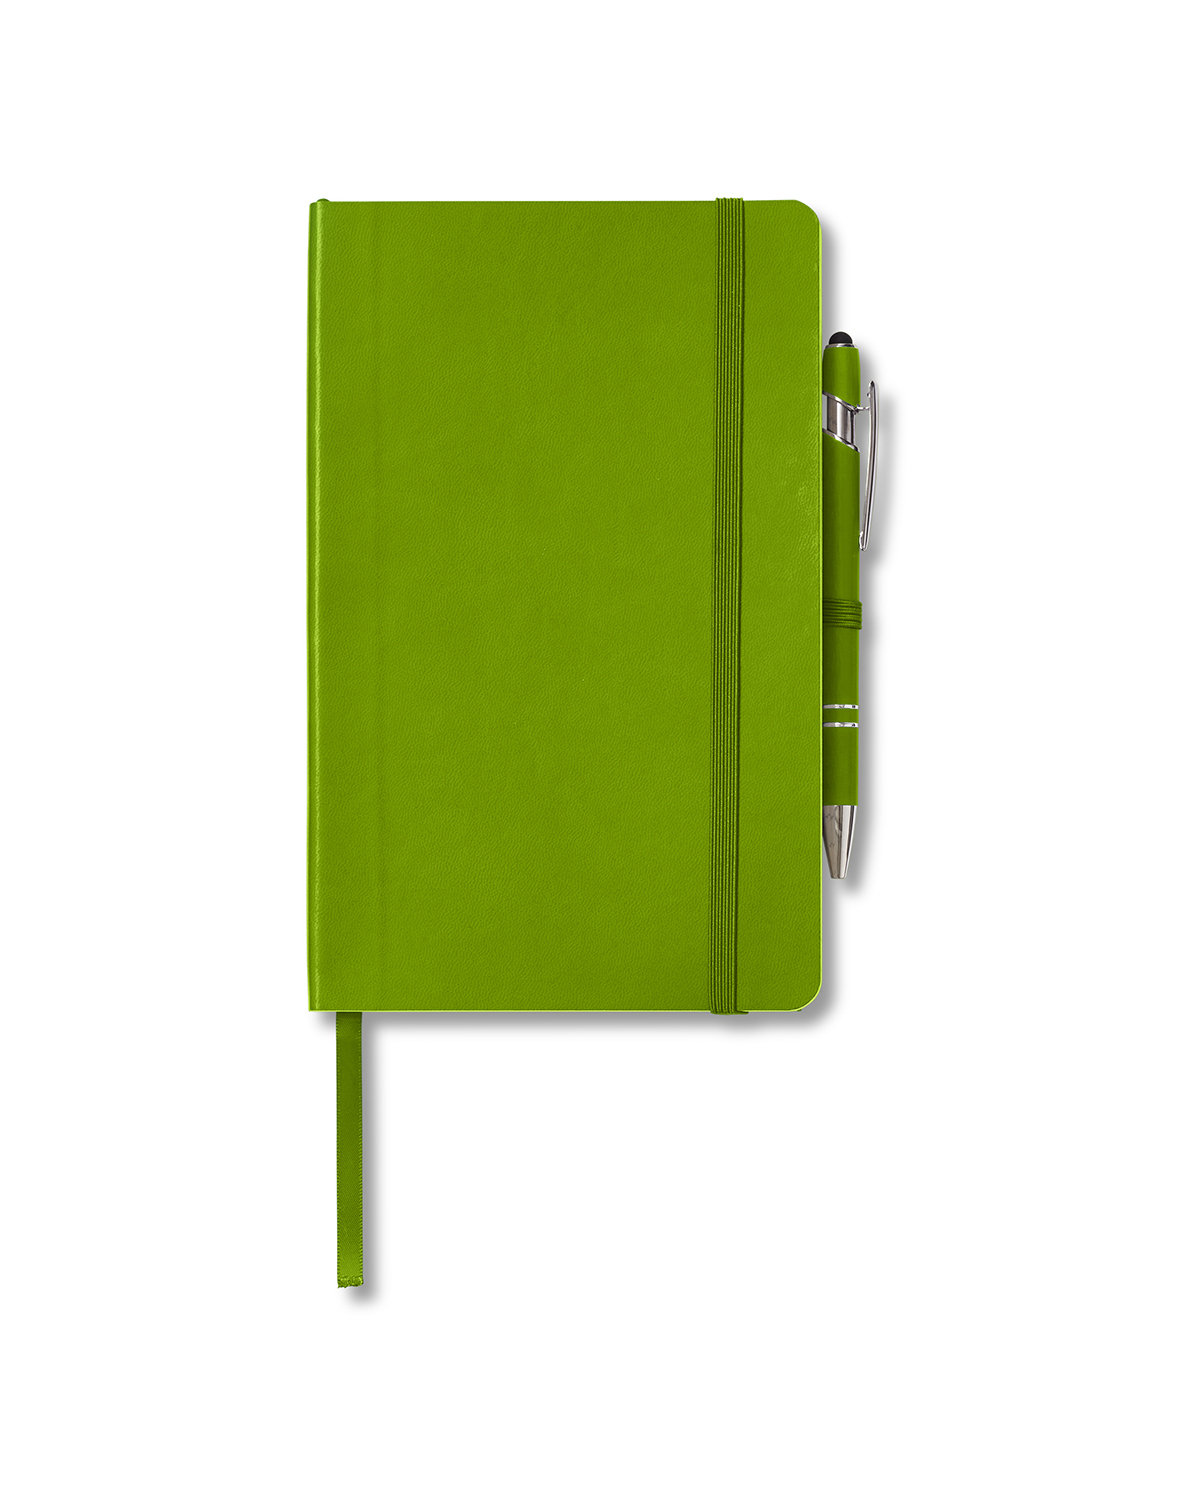 CORE365 Soft Cover Journal And Pen Set acid green 